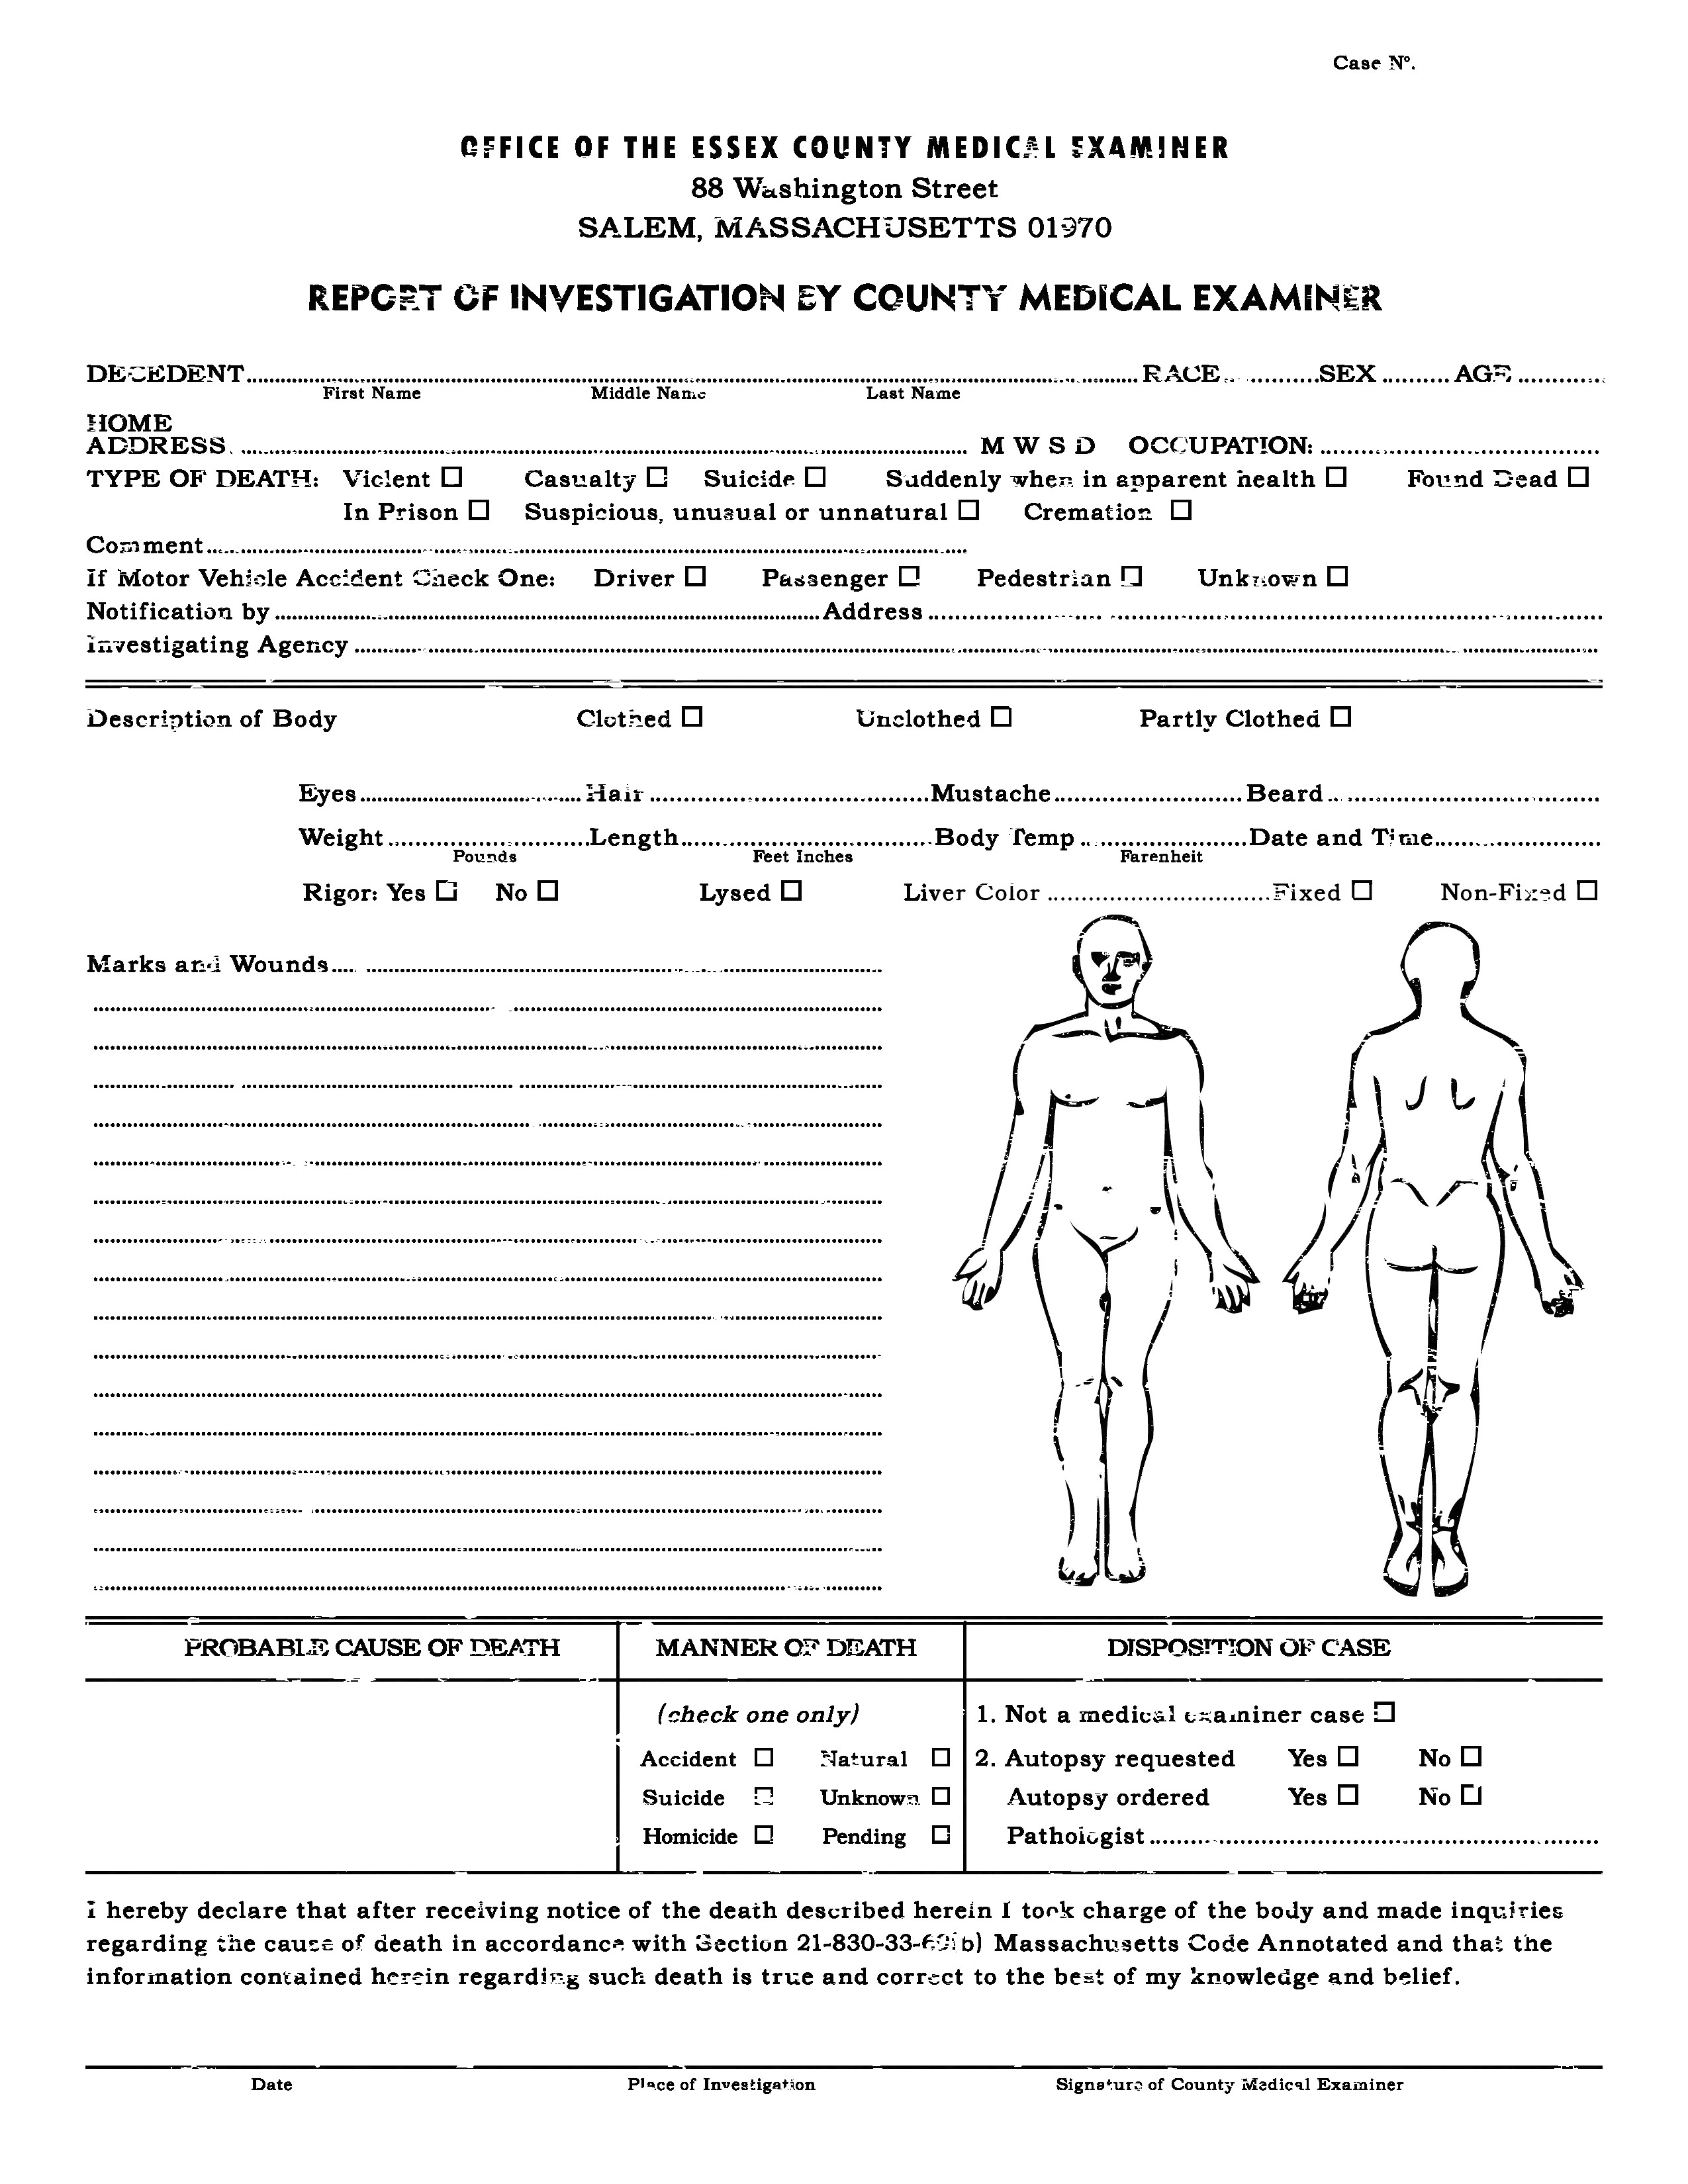 Autopsy Report Template - Atlantaauctionco Within Coroner's Report Template